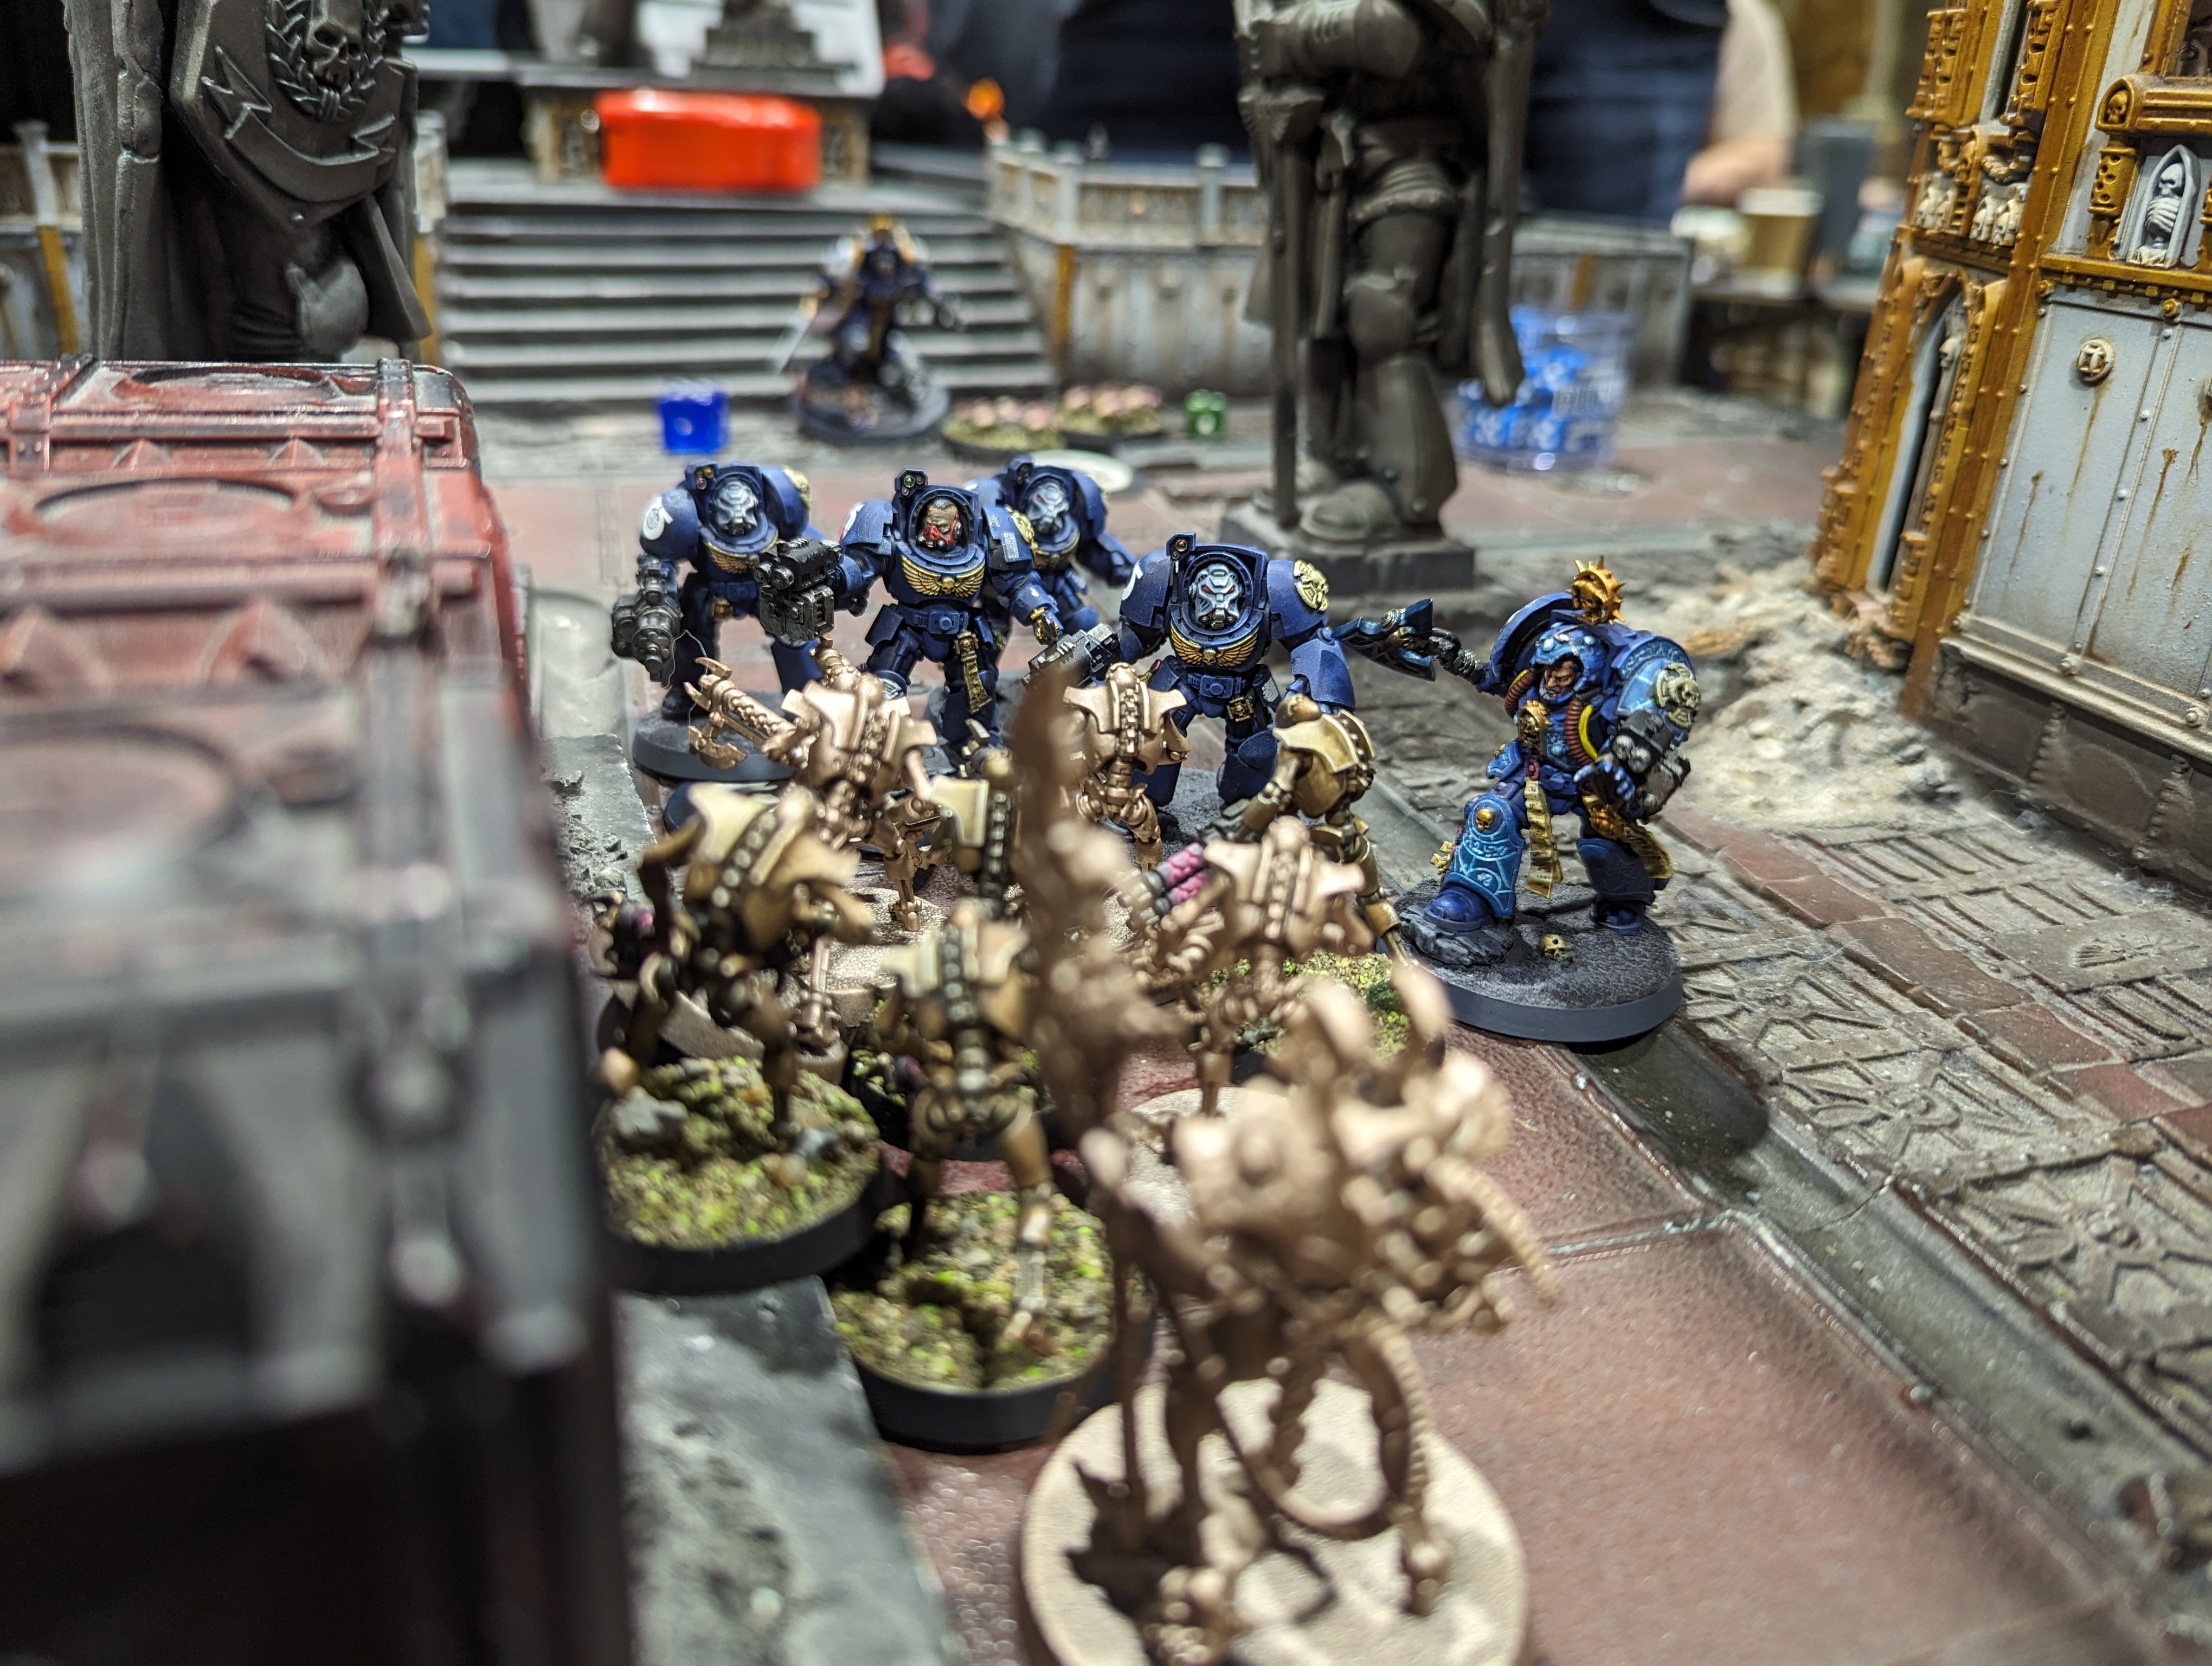 A Necron unit of Warriors faces death in the form of a unit of Ultramarine terminators that have just charged in.